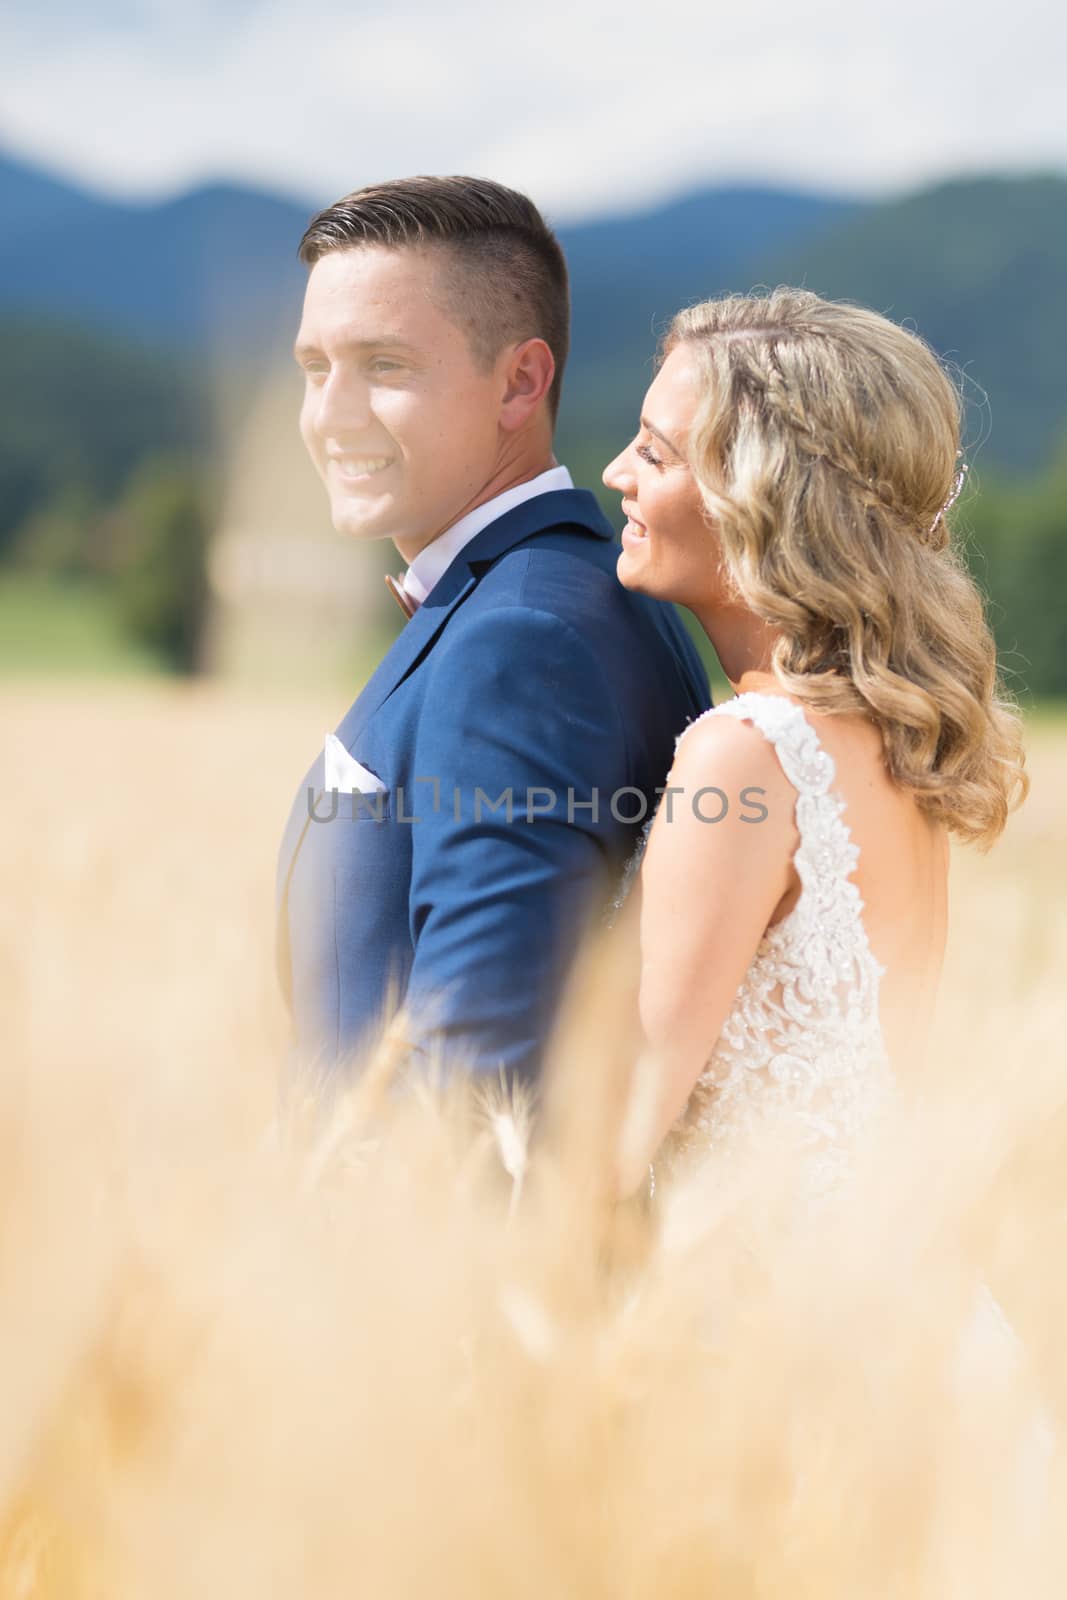 Newlyweds hugging tenderly in wheat field somewhere in Slovenian countryside. Caucasian happy romantic young couple celebrating their marriage by kasto